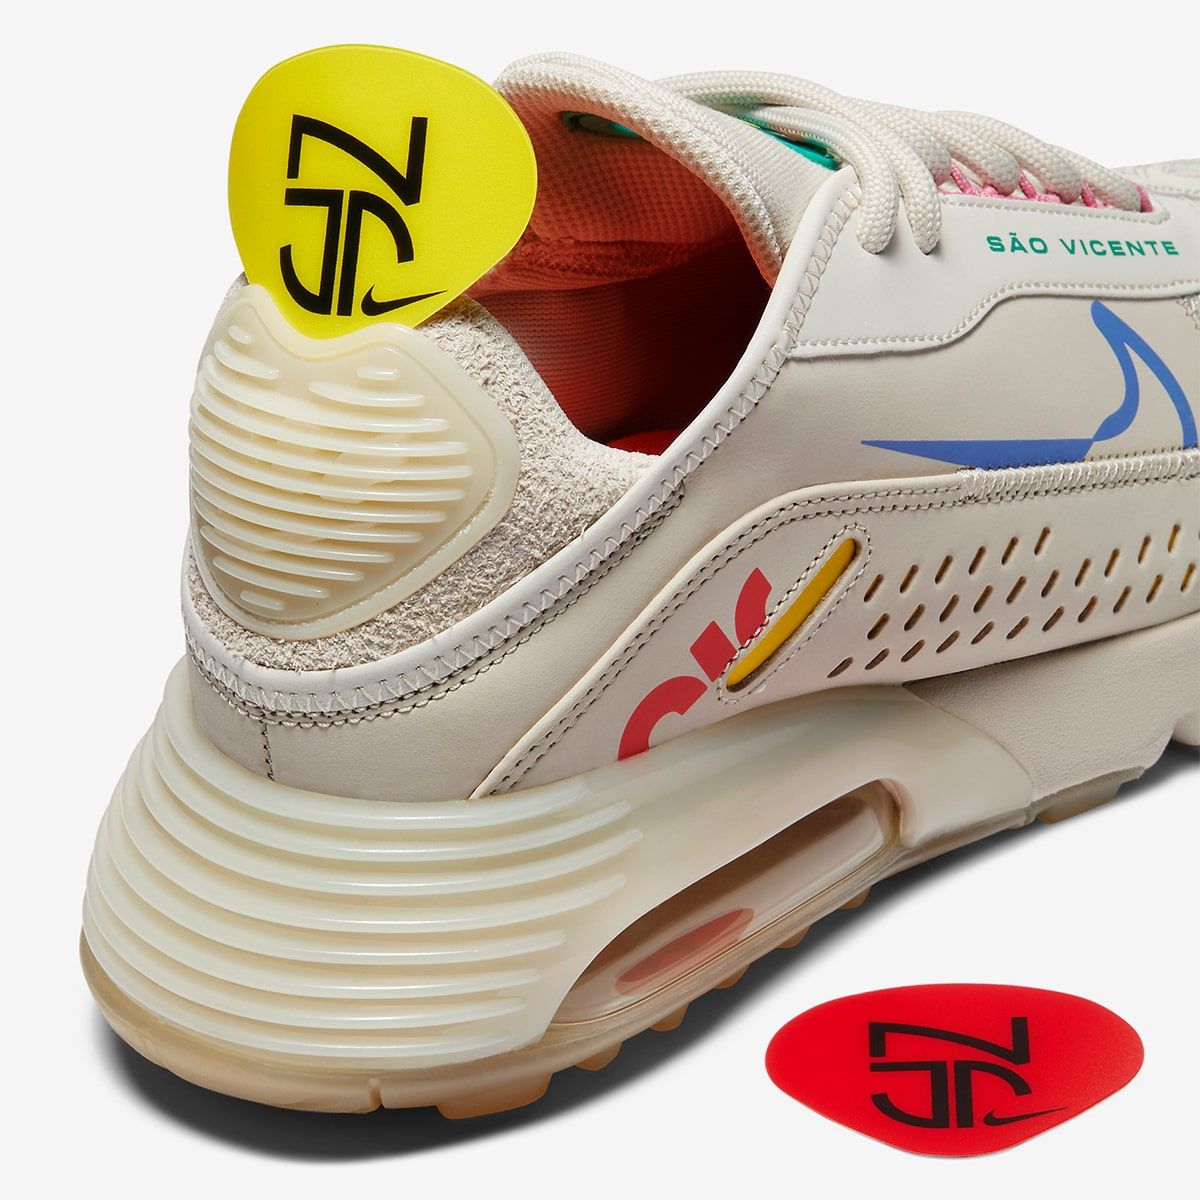 invención Enciclopedia fax Neymar's Two Nike Air Max 2090s Tribute His Past and Present Life | HOUSE  OF HEAT